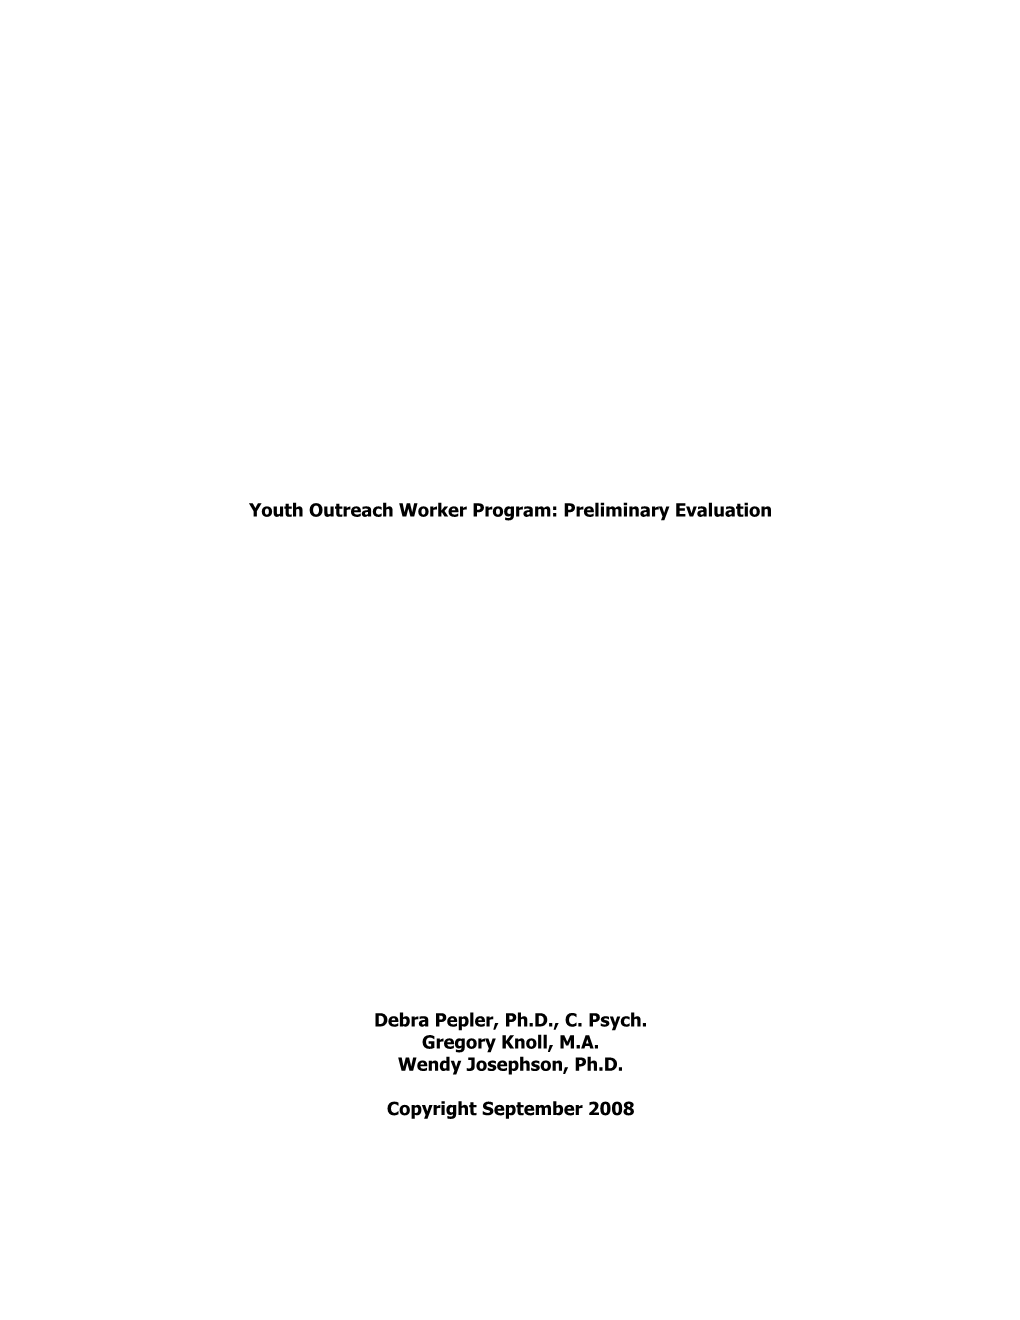 Youth Outreach Worker Program: Preliminary Evaluation